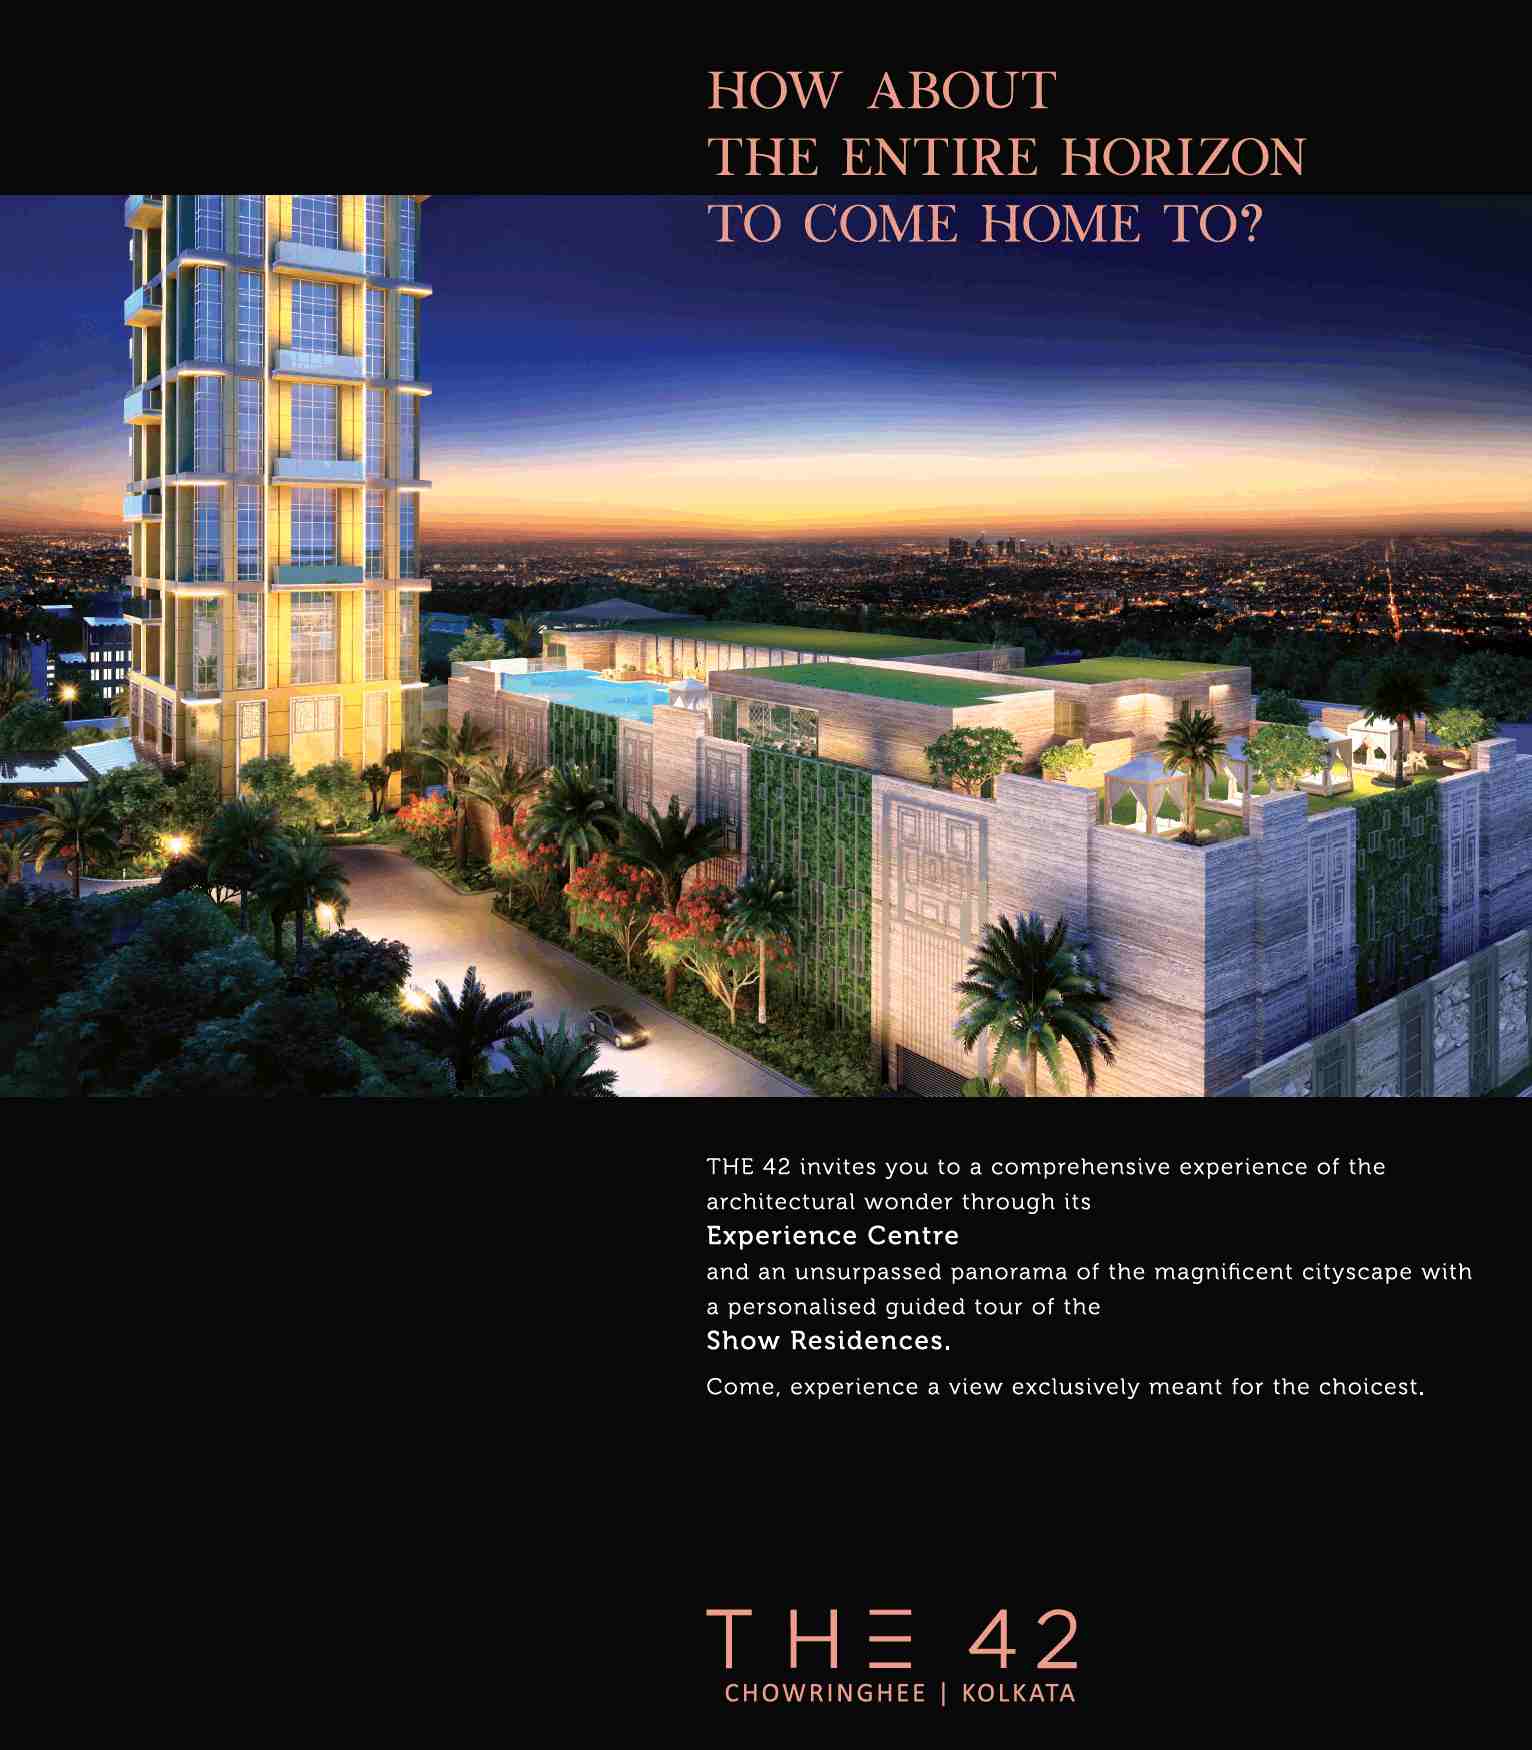 Experience a view exclusively meant for the choicest at Alcove The 42 in Kolkata Update